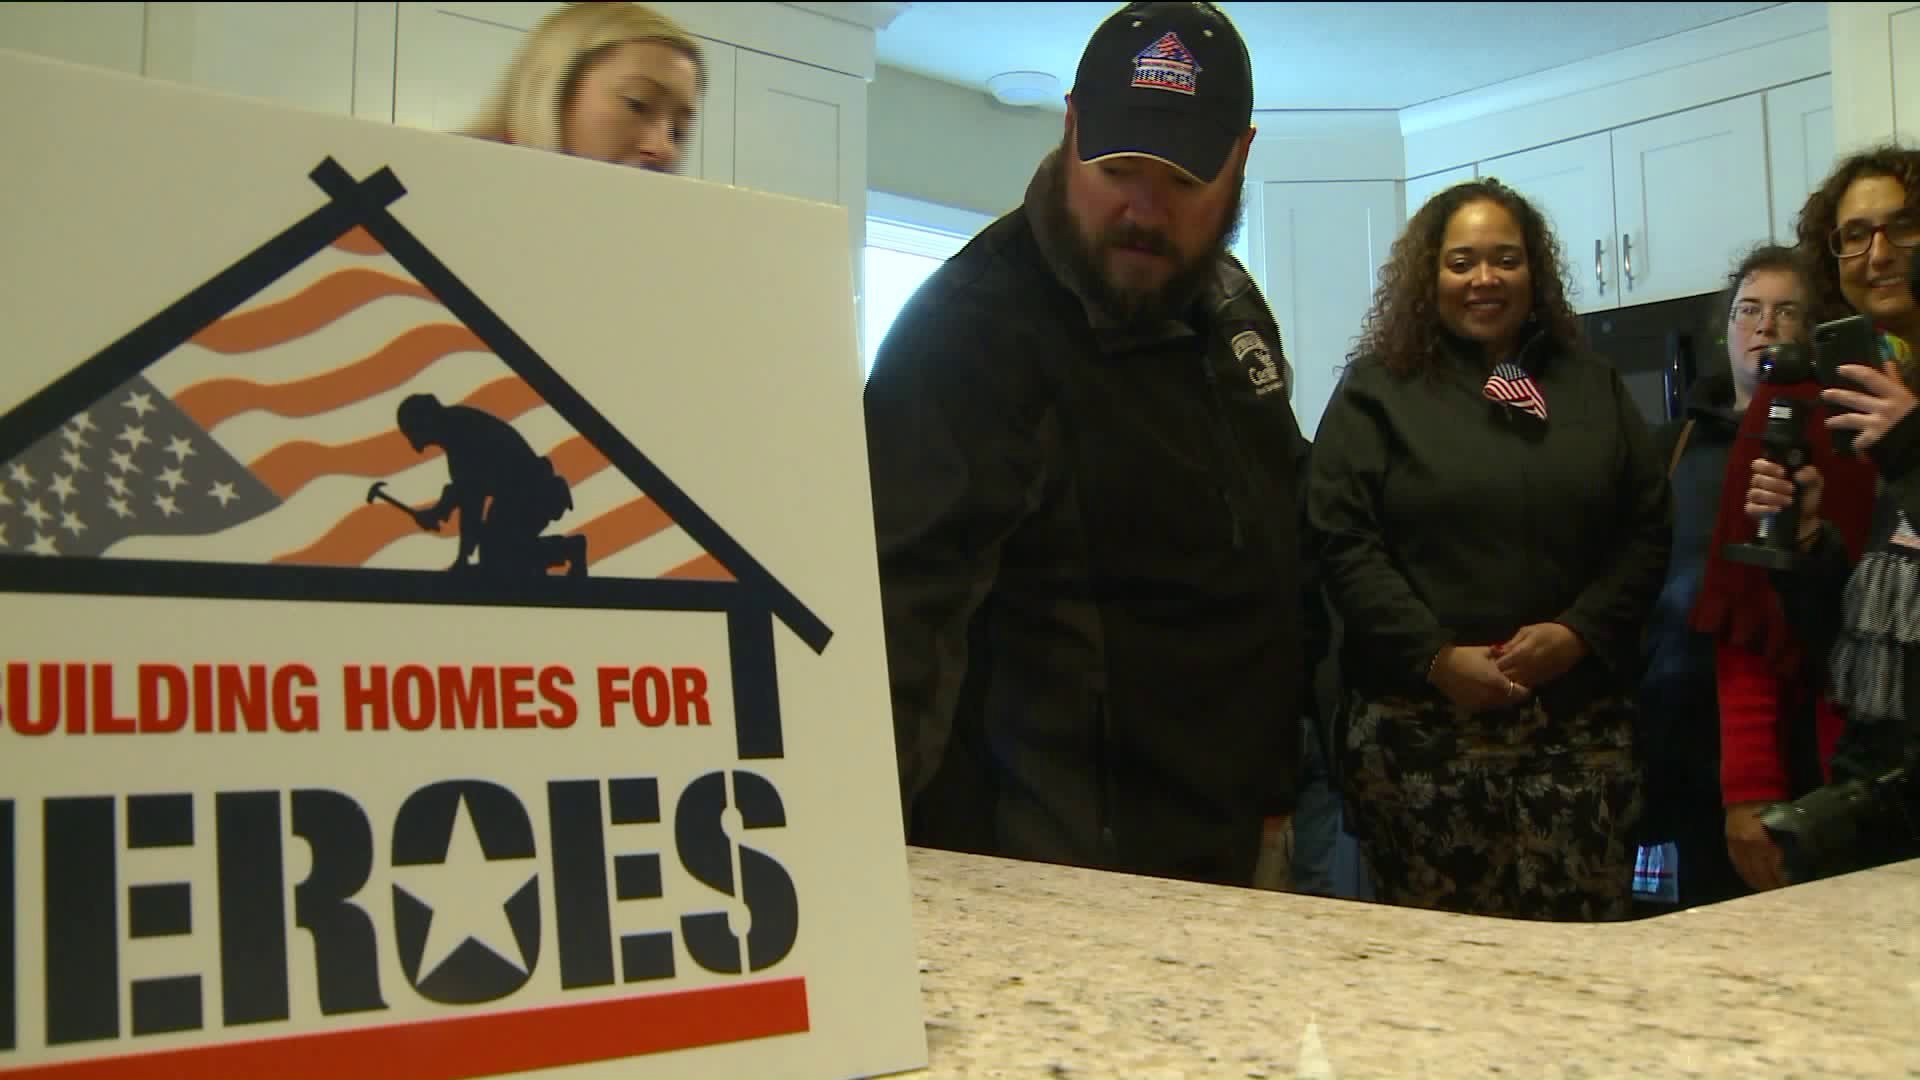 Building homes for heroes